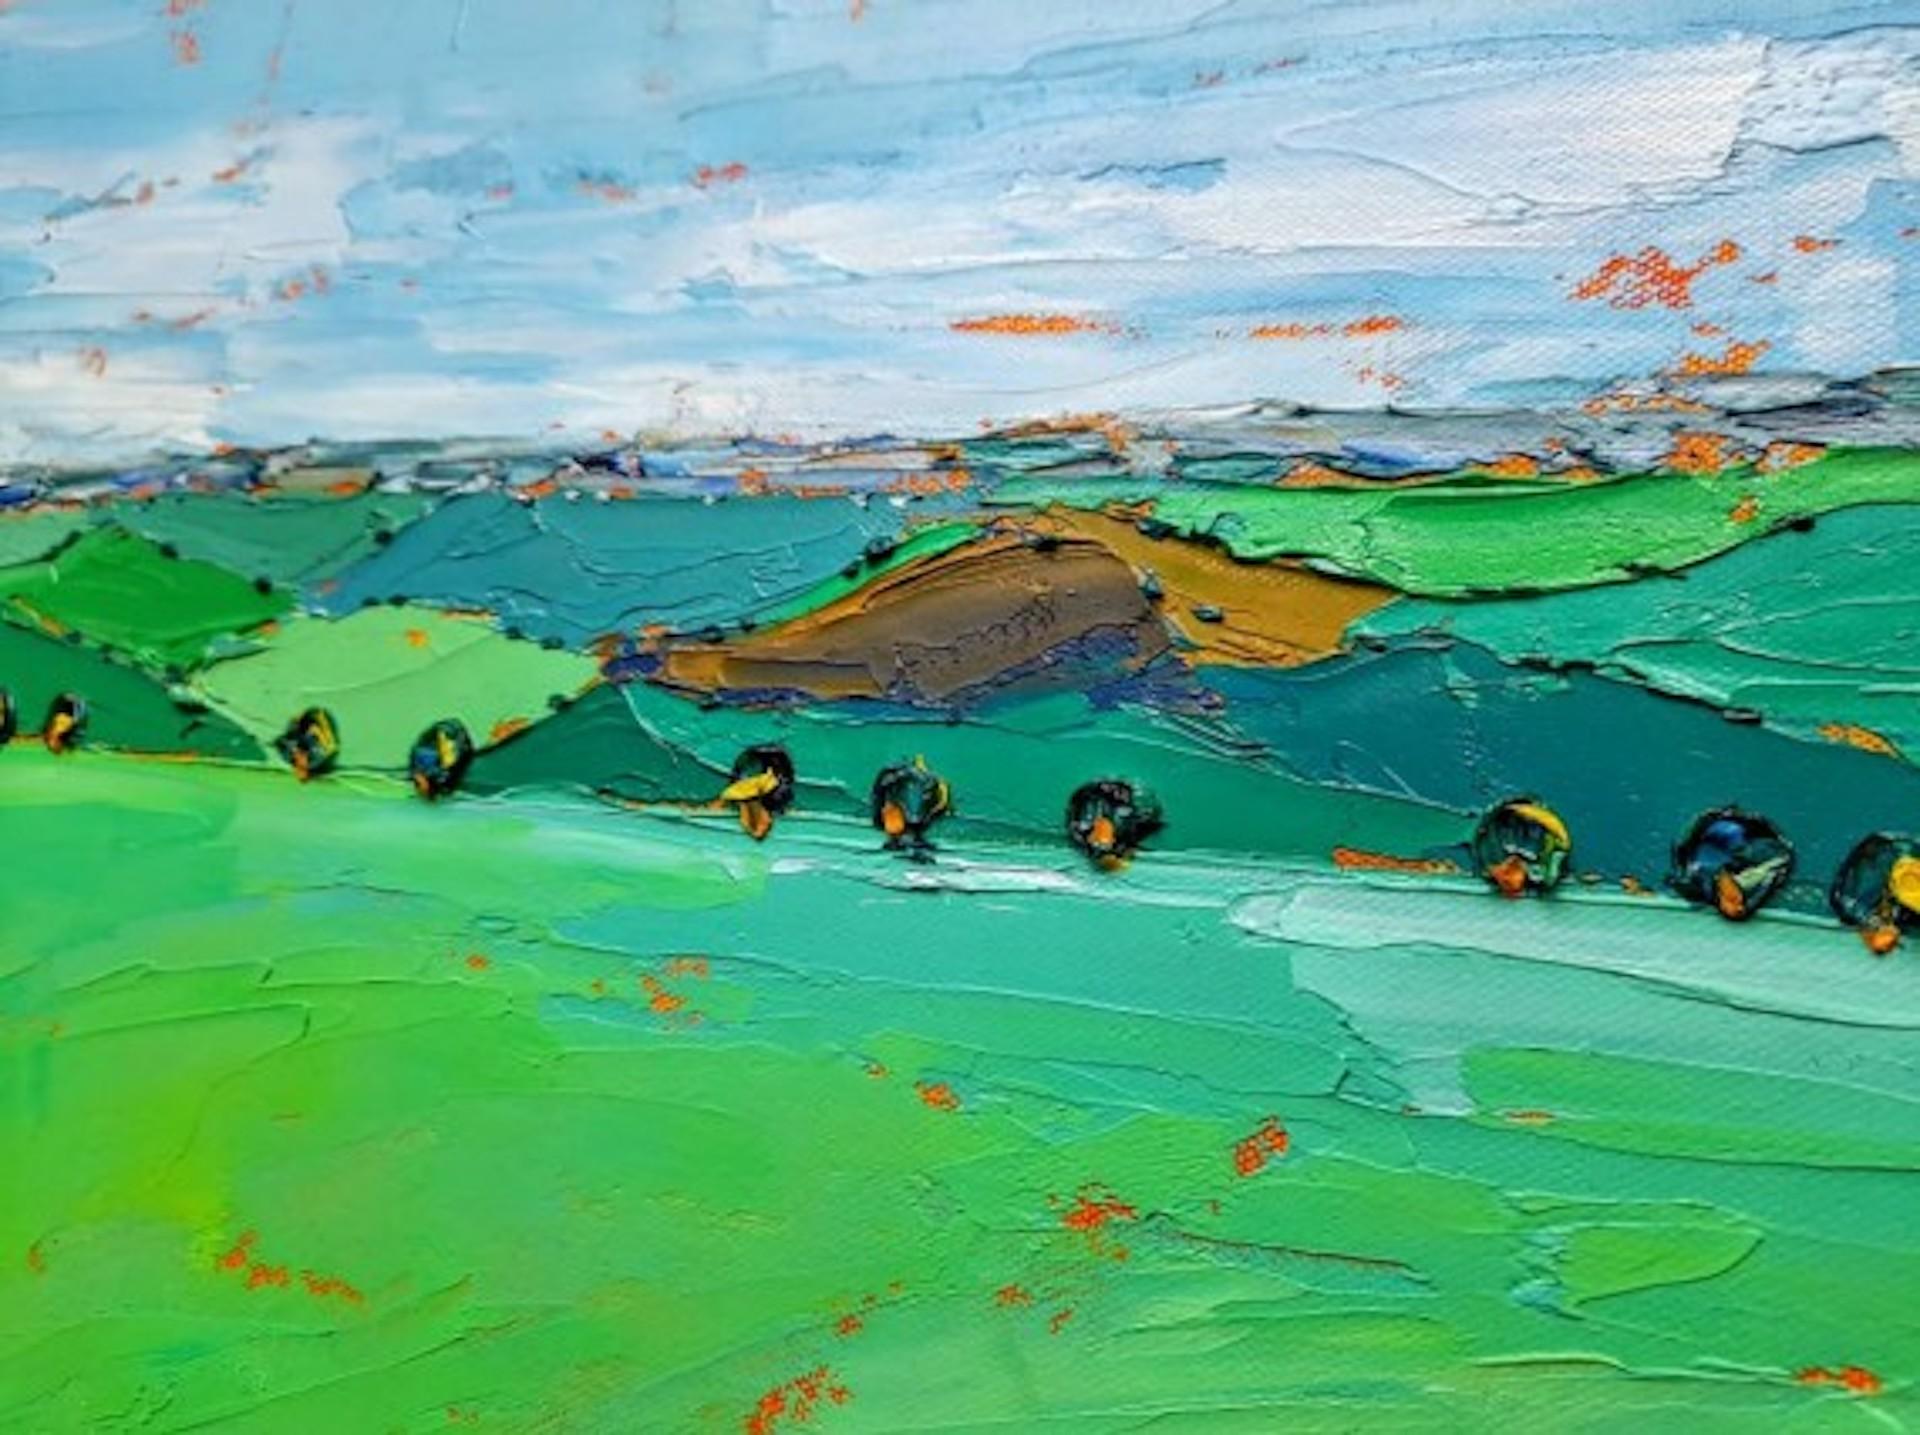 Cotswold Field Patterns [2021]
Original
Landscape
Oil paint on canvas
Image size: H:46 cm x W:75 cm
Complete Size of Unframed Work: H:46 cm x W:75 cm x D:2cm
Sold Unframed
Please note that insitu images are purely an indication of how a piece may